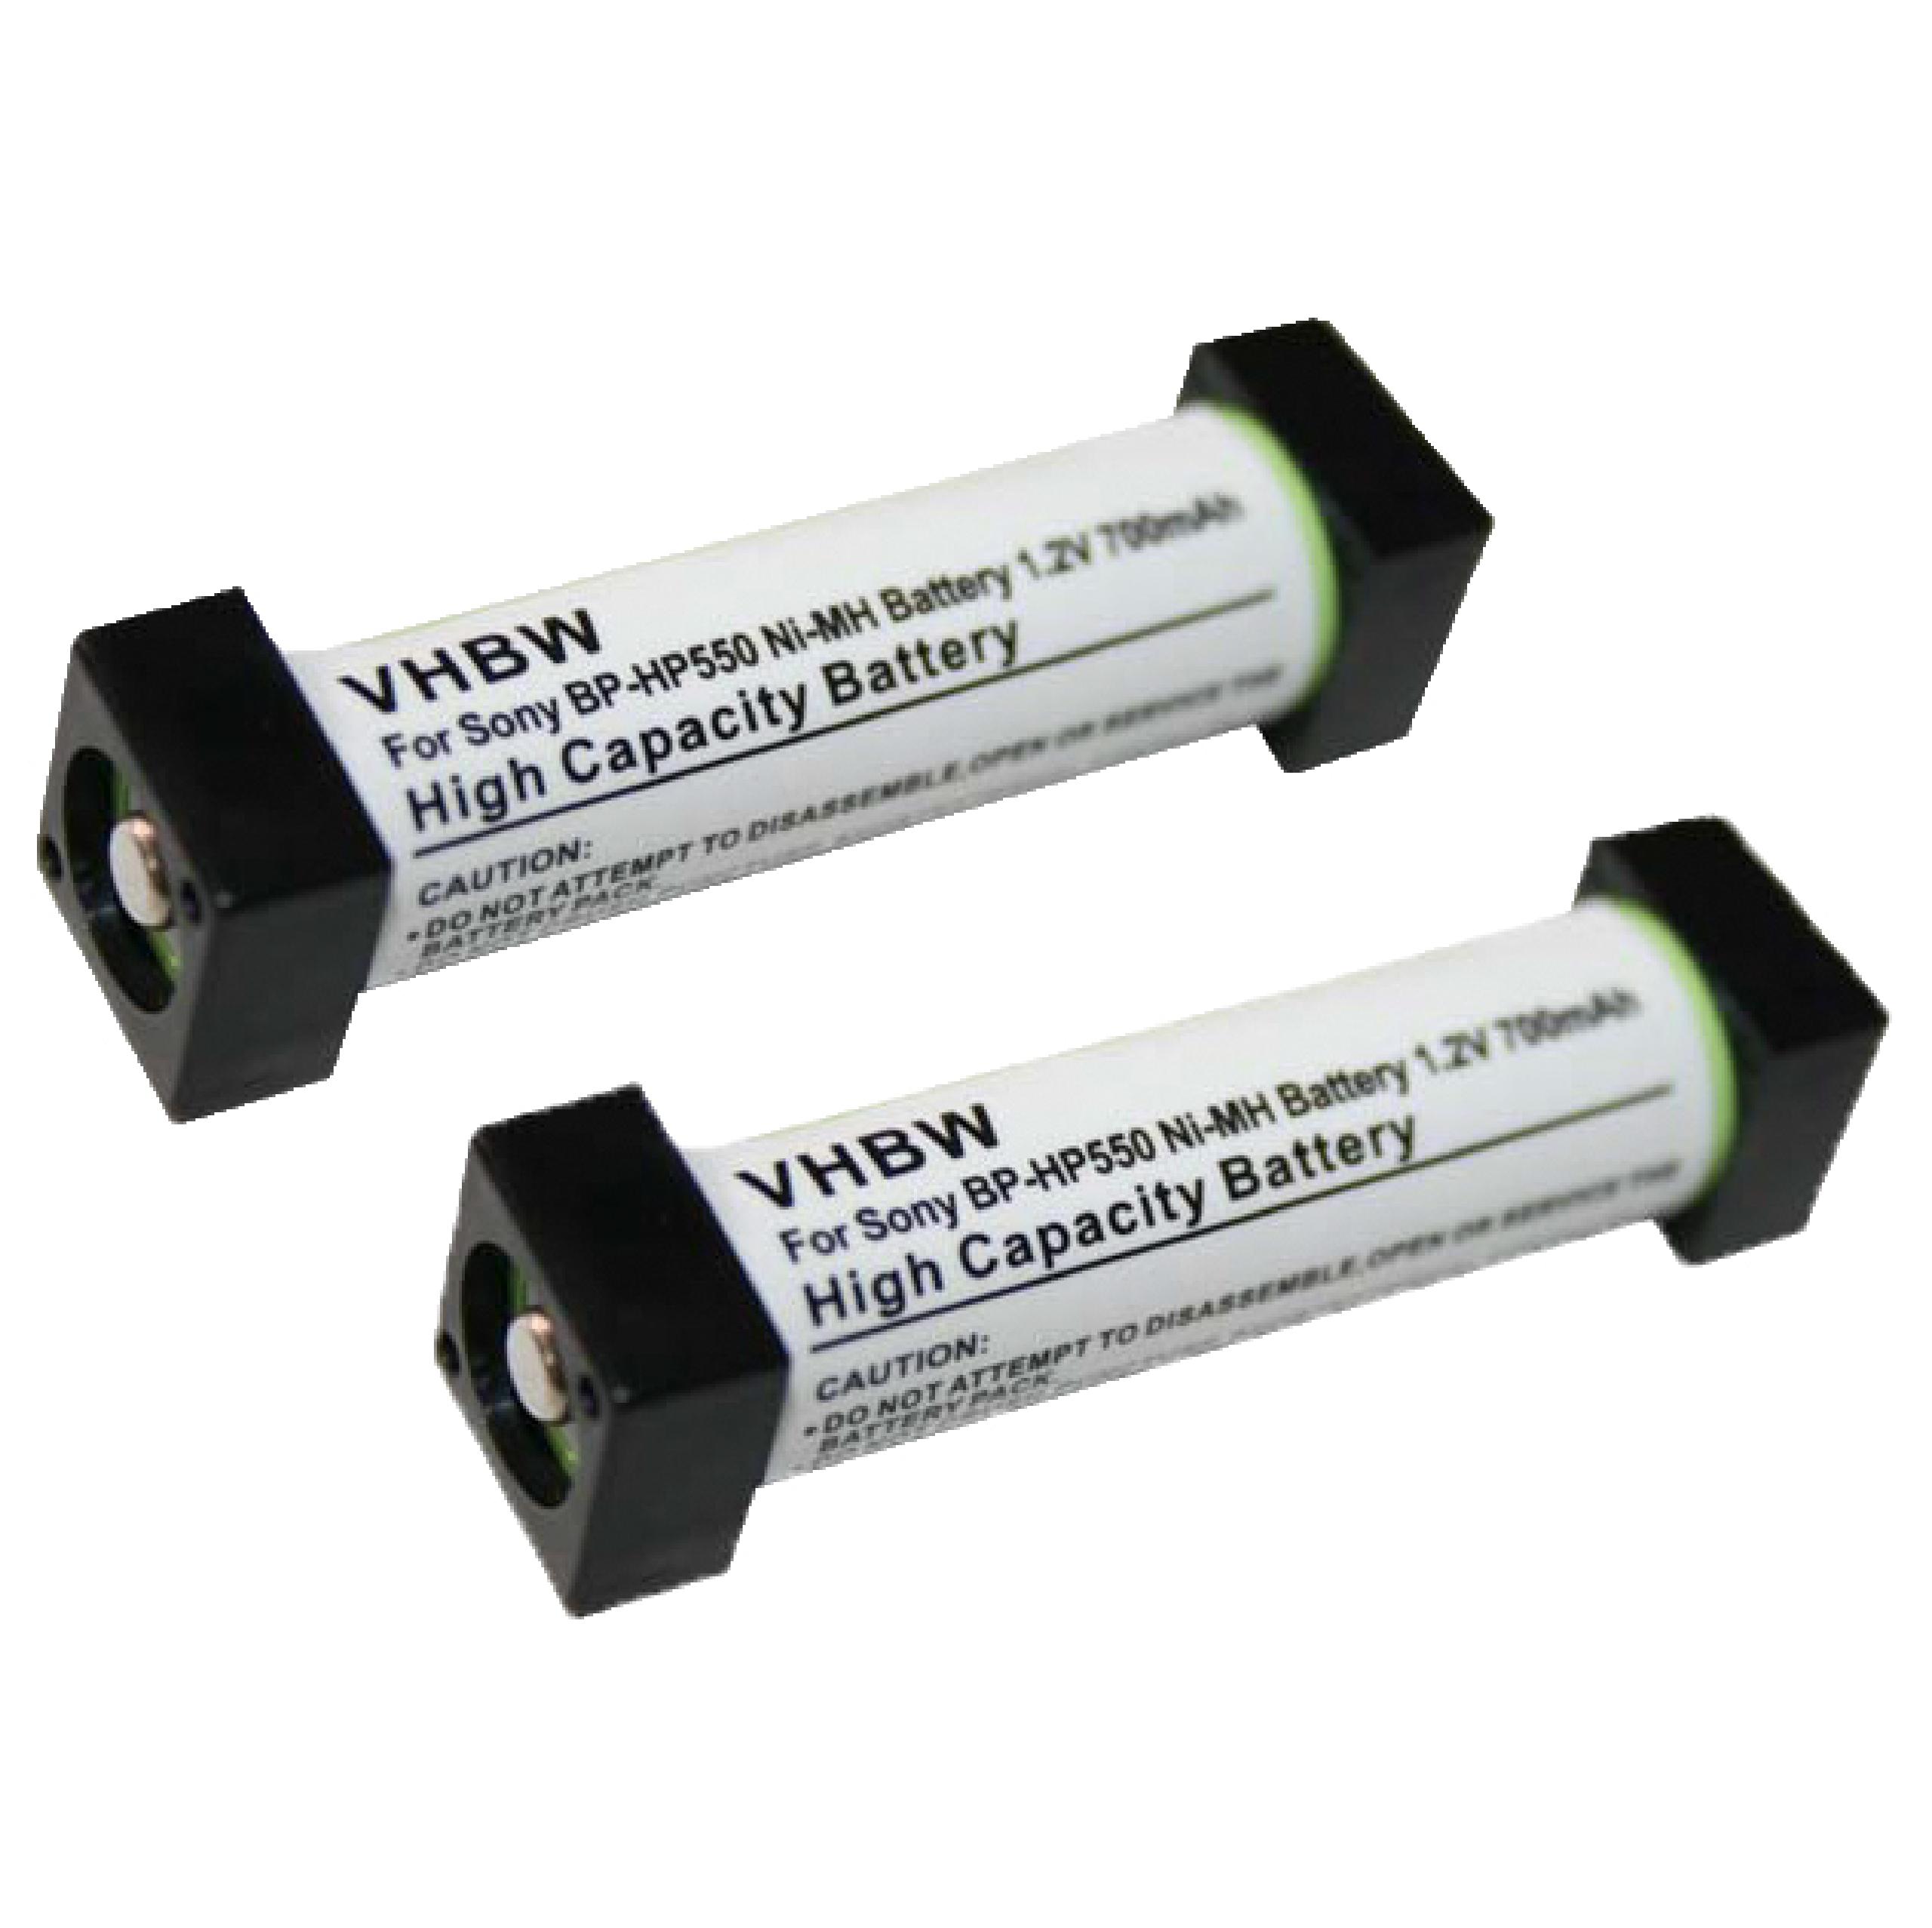 Wireless Headset Battery (2 Units) Replacement for Sony 1-756-316-22, 1-756-316-21 - 700mAh 1.2V NiMH